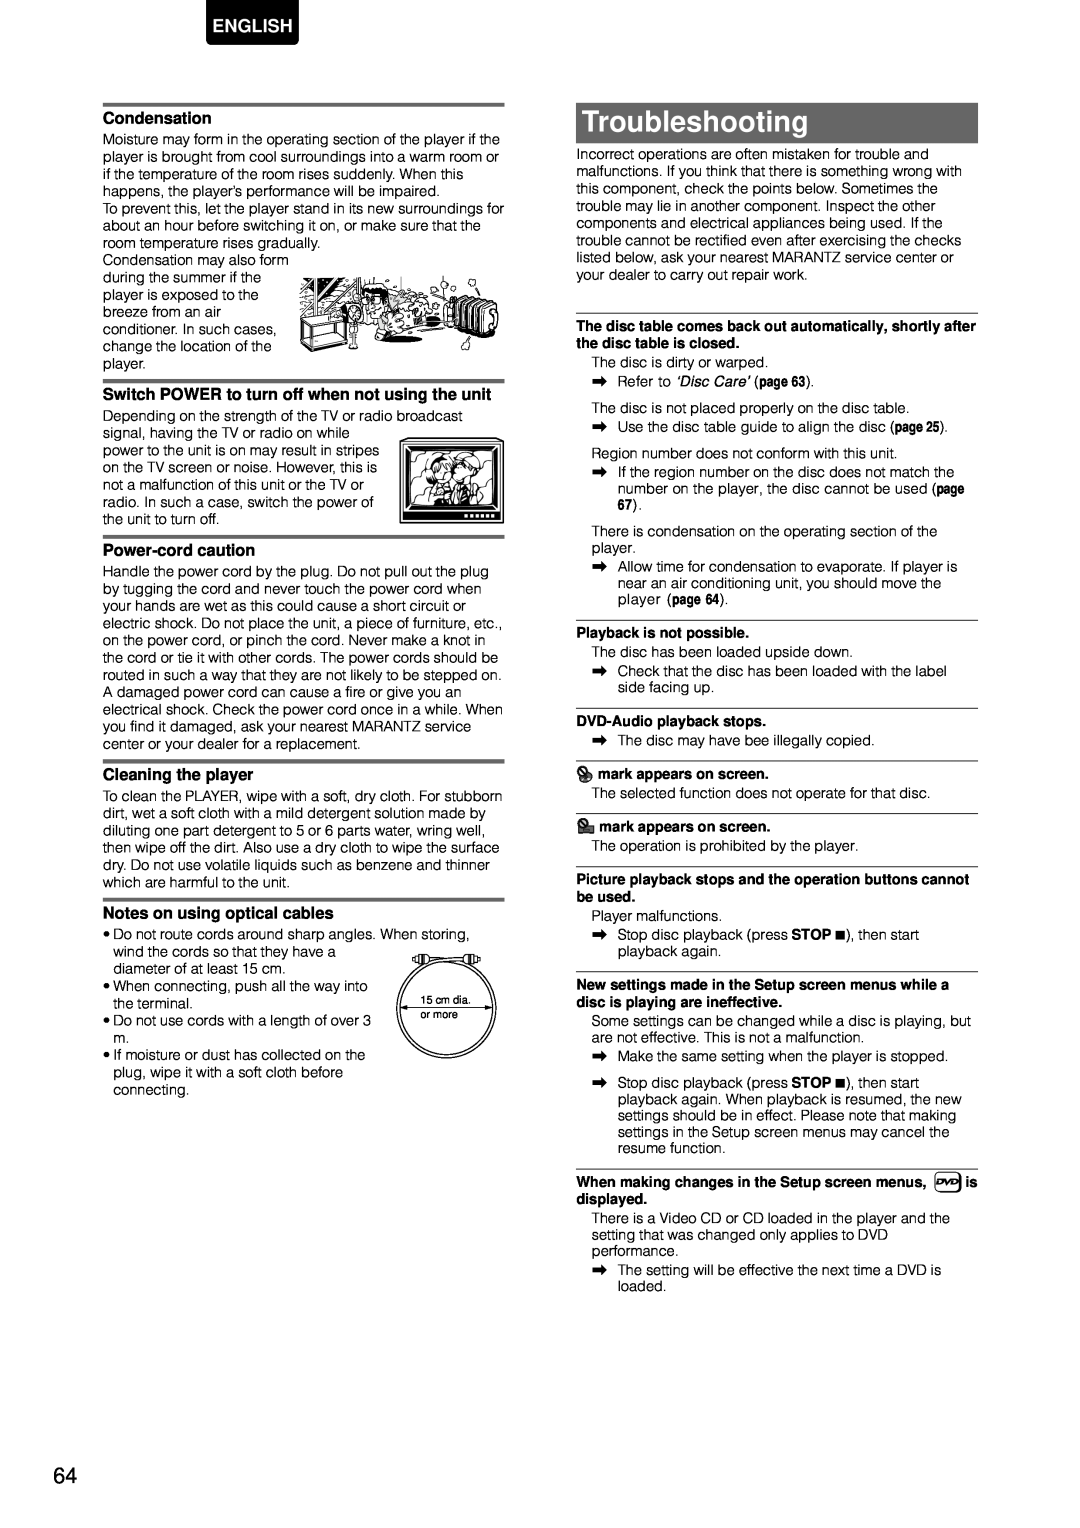 Marantz DV-12S1 manual Troubleshooting, Condensation, Switch POWER to turn off when not using the unit, Power-cord caution 